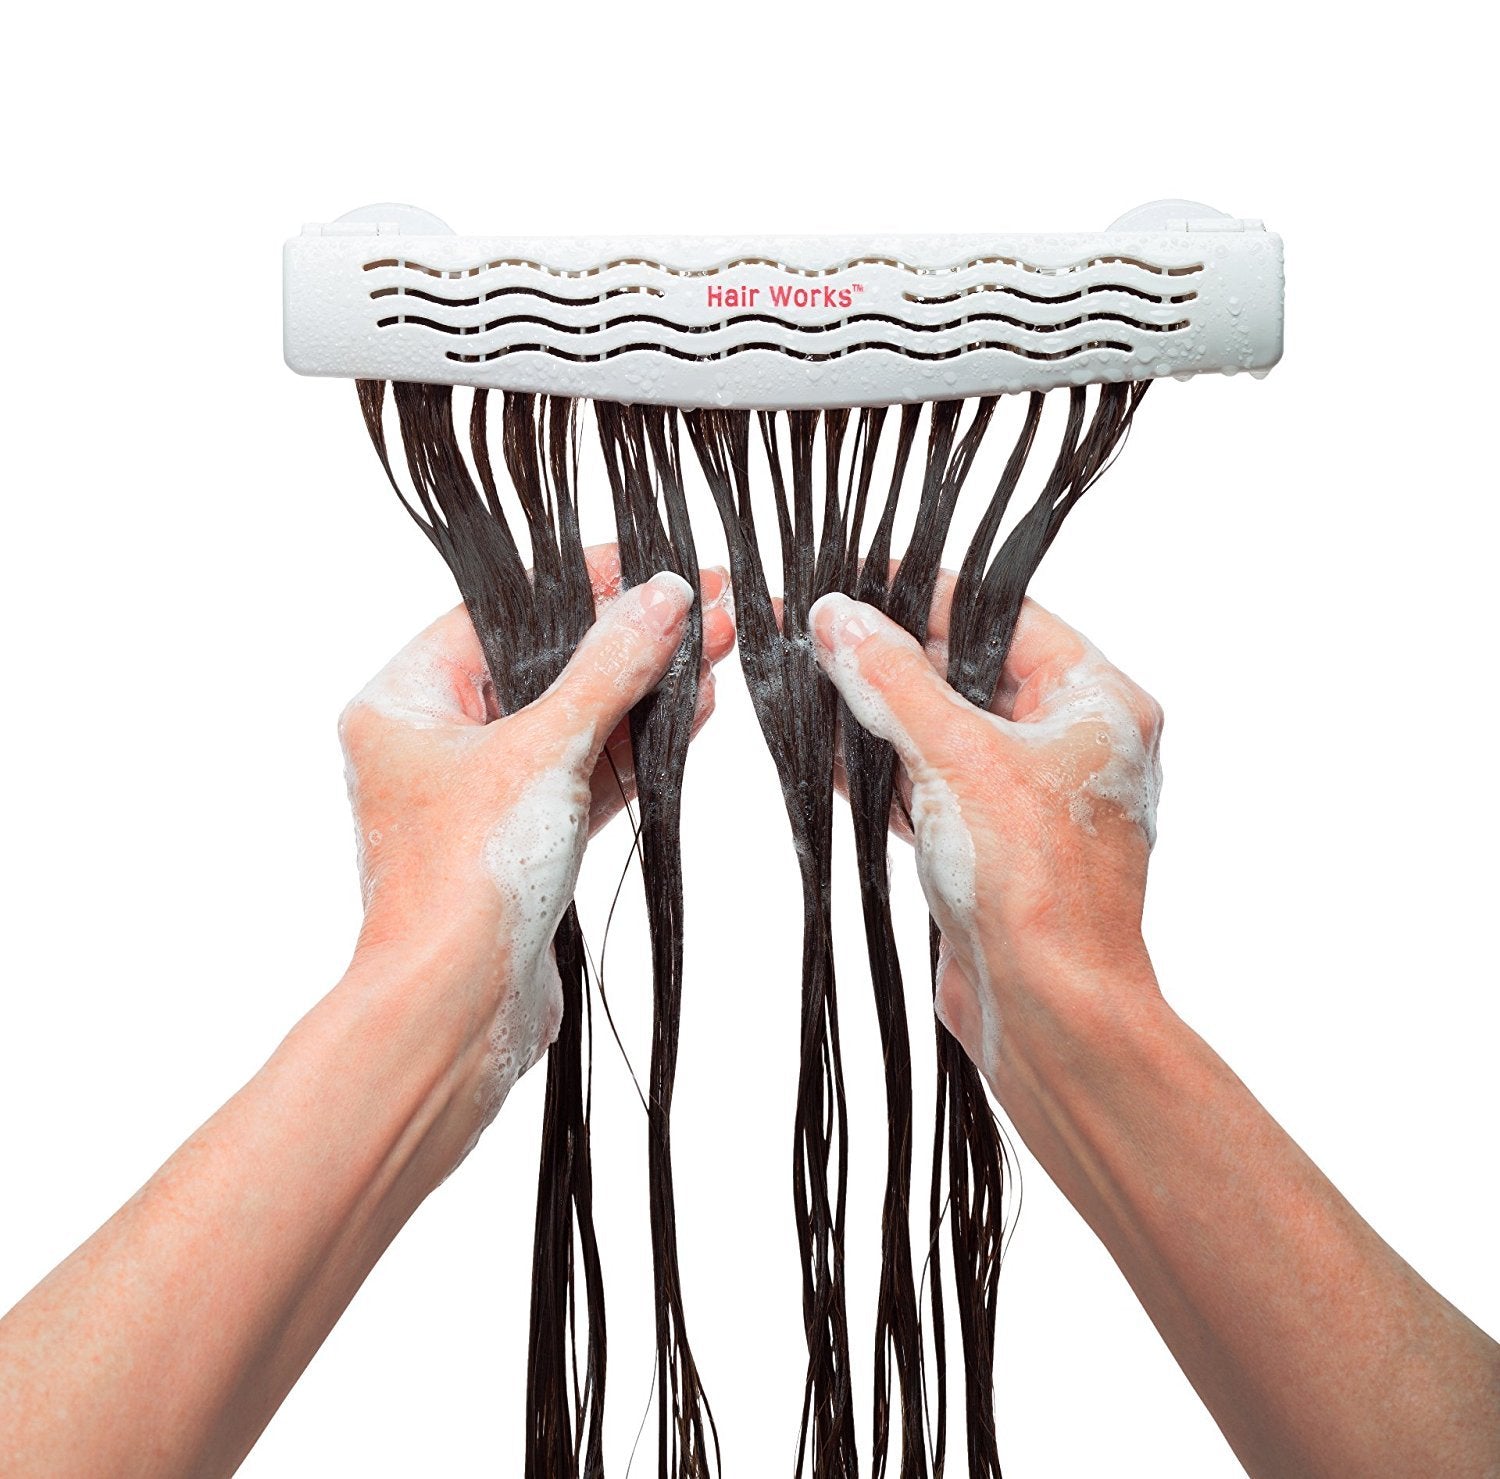 How to Wash, Condition, Detangle, & Style Hair Extensions